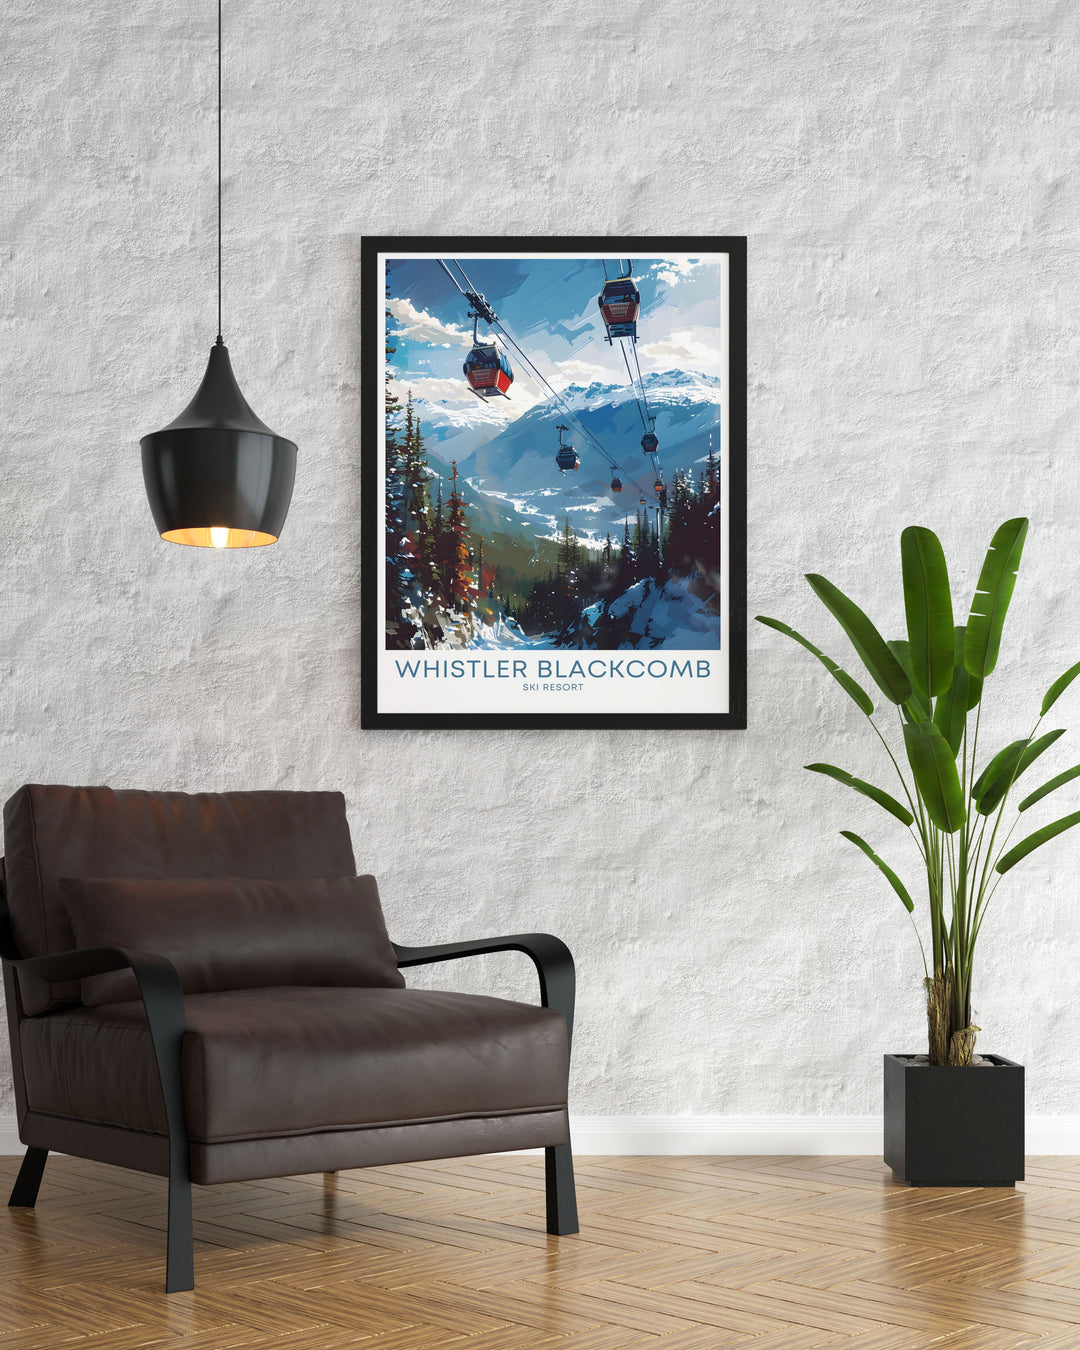 Unique snowboarding poster showcasing the Peak 2 Peak Gondola at Whistler Blackcomb. Perfect for adding a vibrant and adventurous touch to your home decor while celebrating the thrill of winter sports in Whistler Canada.